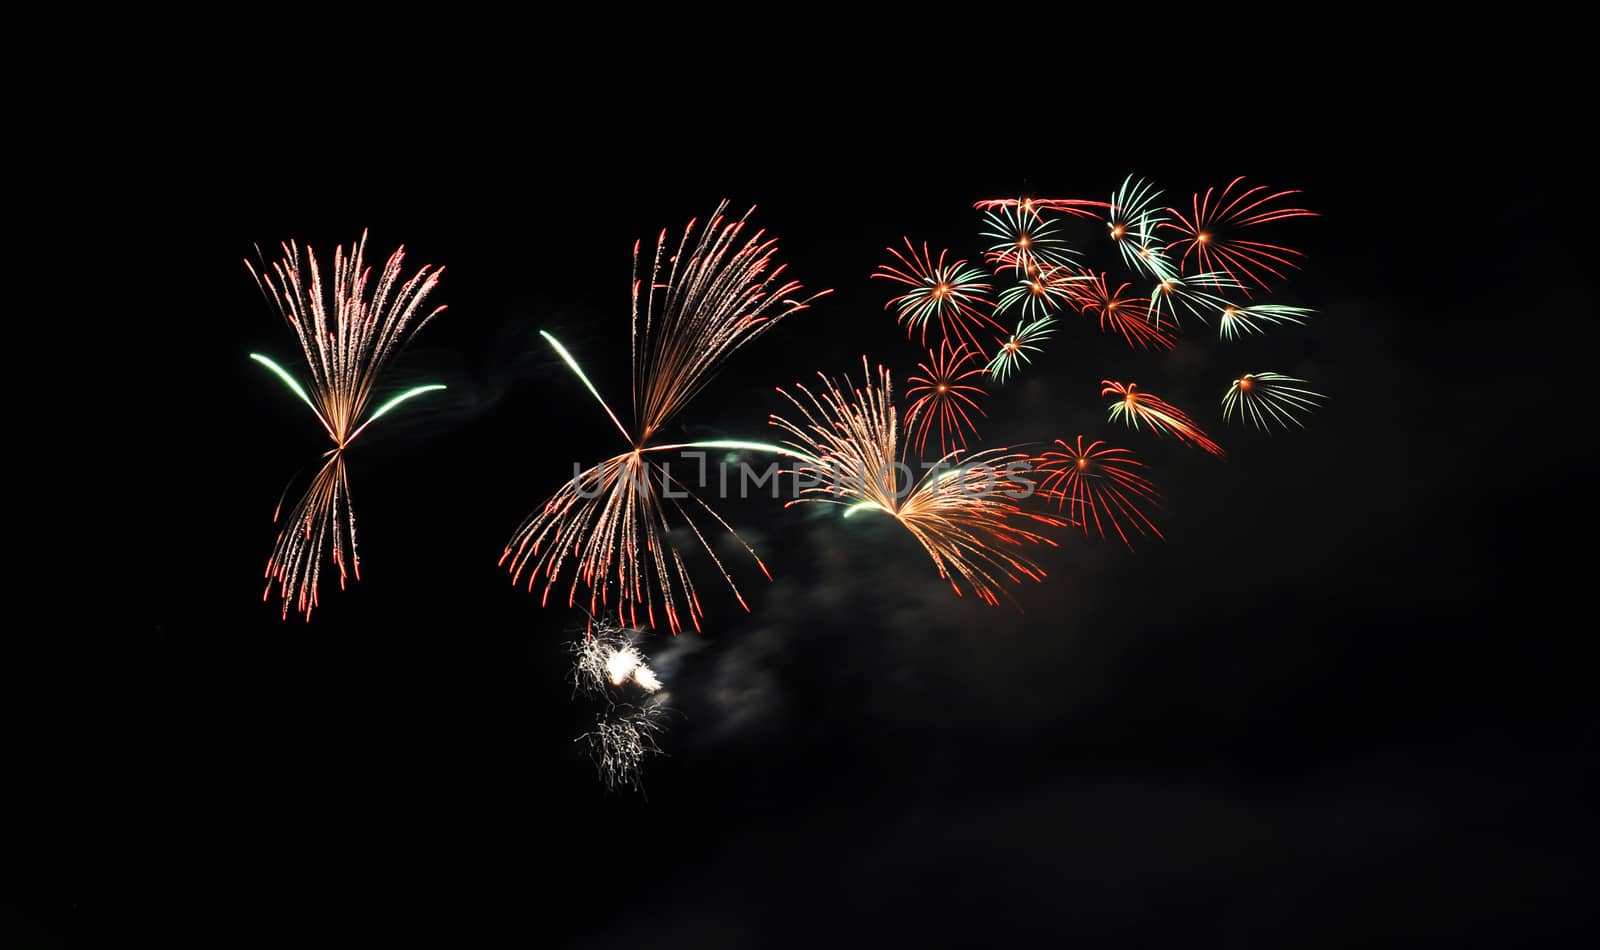 Colorful fireworks in the night sky 